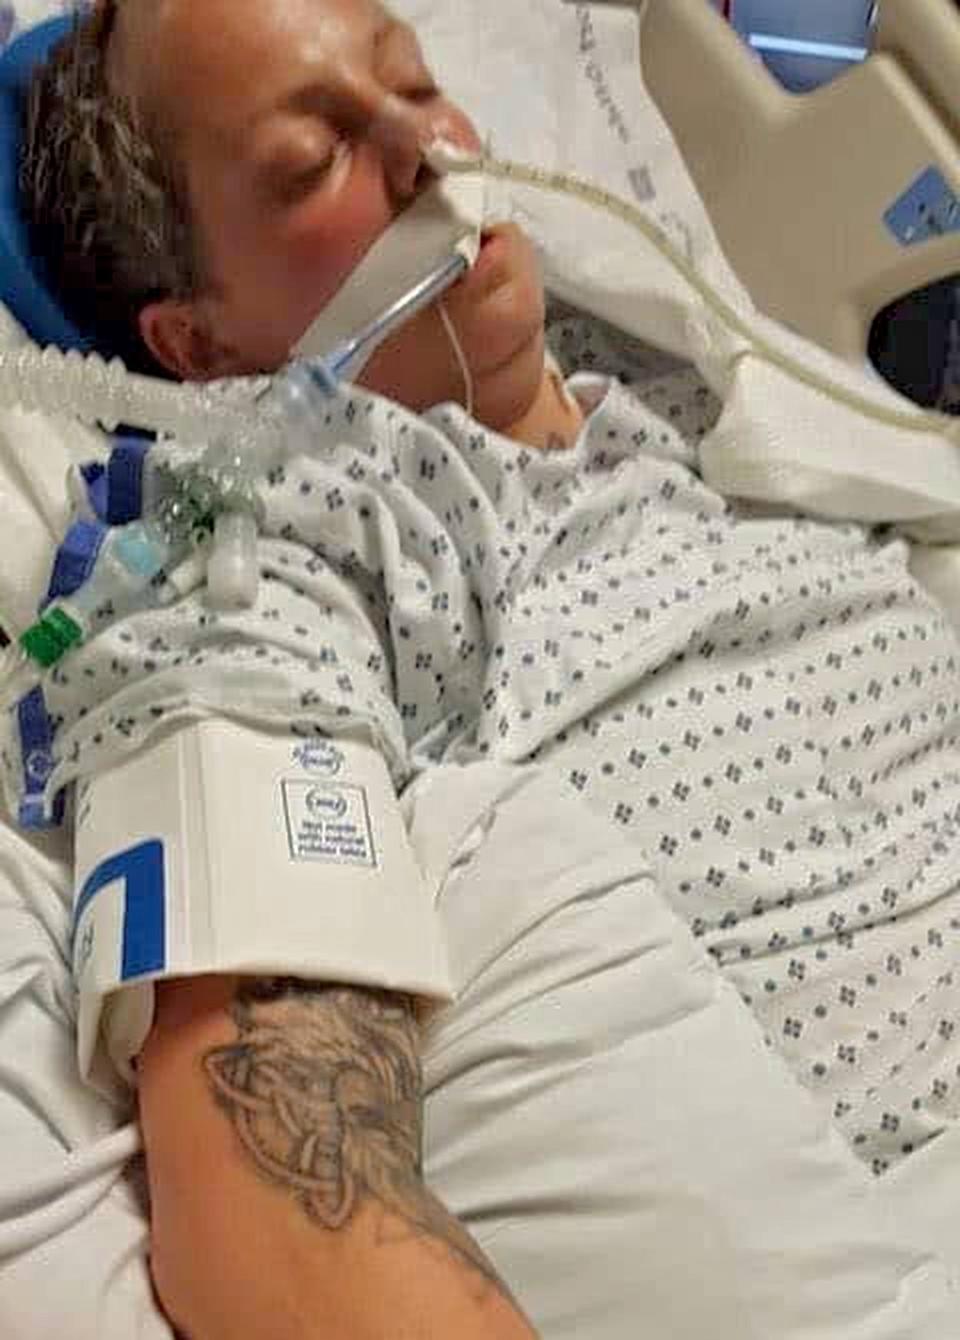 Stacey Garrett, 39, died of a rare stroke at a hospital in 2018 after being incarcerated at the Pottawatomie County jail. The autopsy report listed substance use as a contributing factor and could not determine if her death was natural, accidental or intentional. In this photo she is seen in the hospital moments before she died.